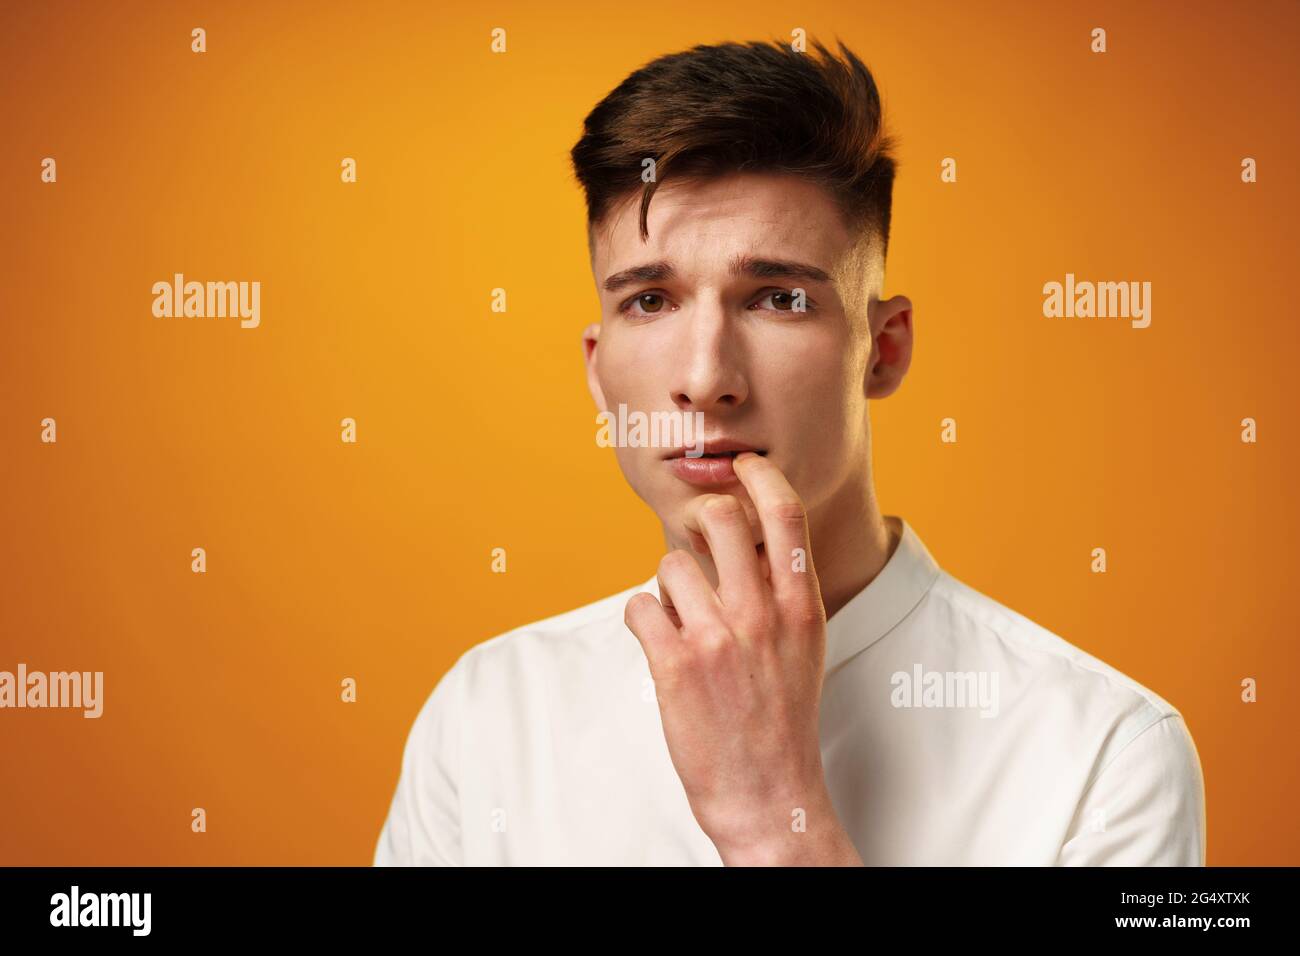 Frustrated and nervous young man biting nail against yellow background Stock Photo